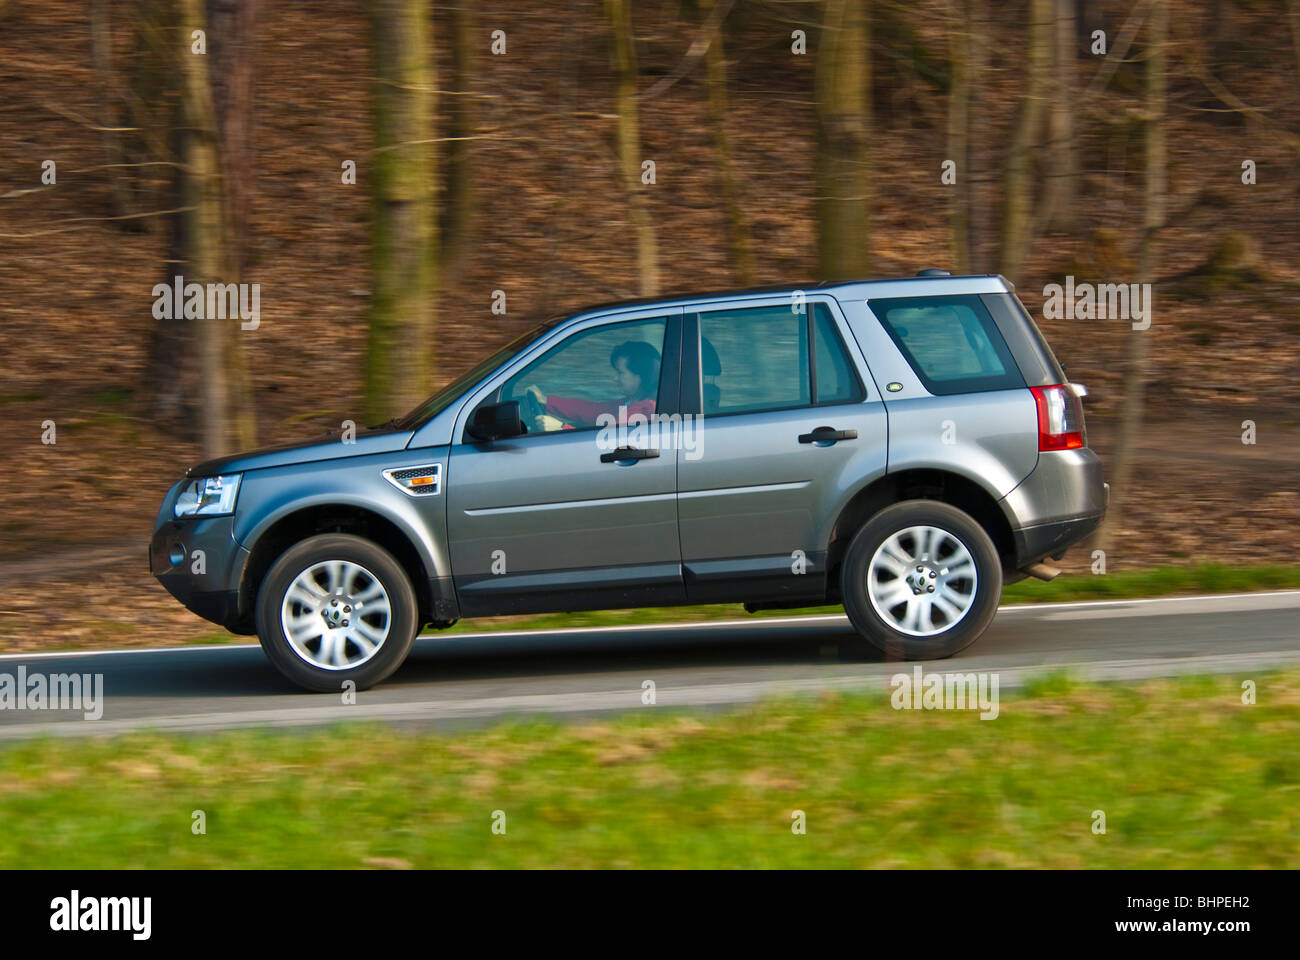 Land Rover Freelander, 2007 model, driving with high speed on a country road, Germany Stock Photo